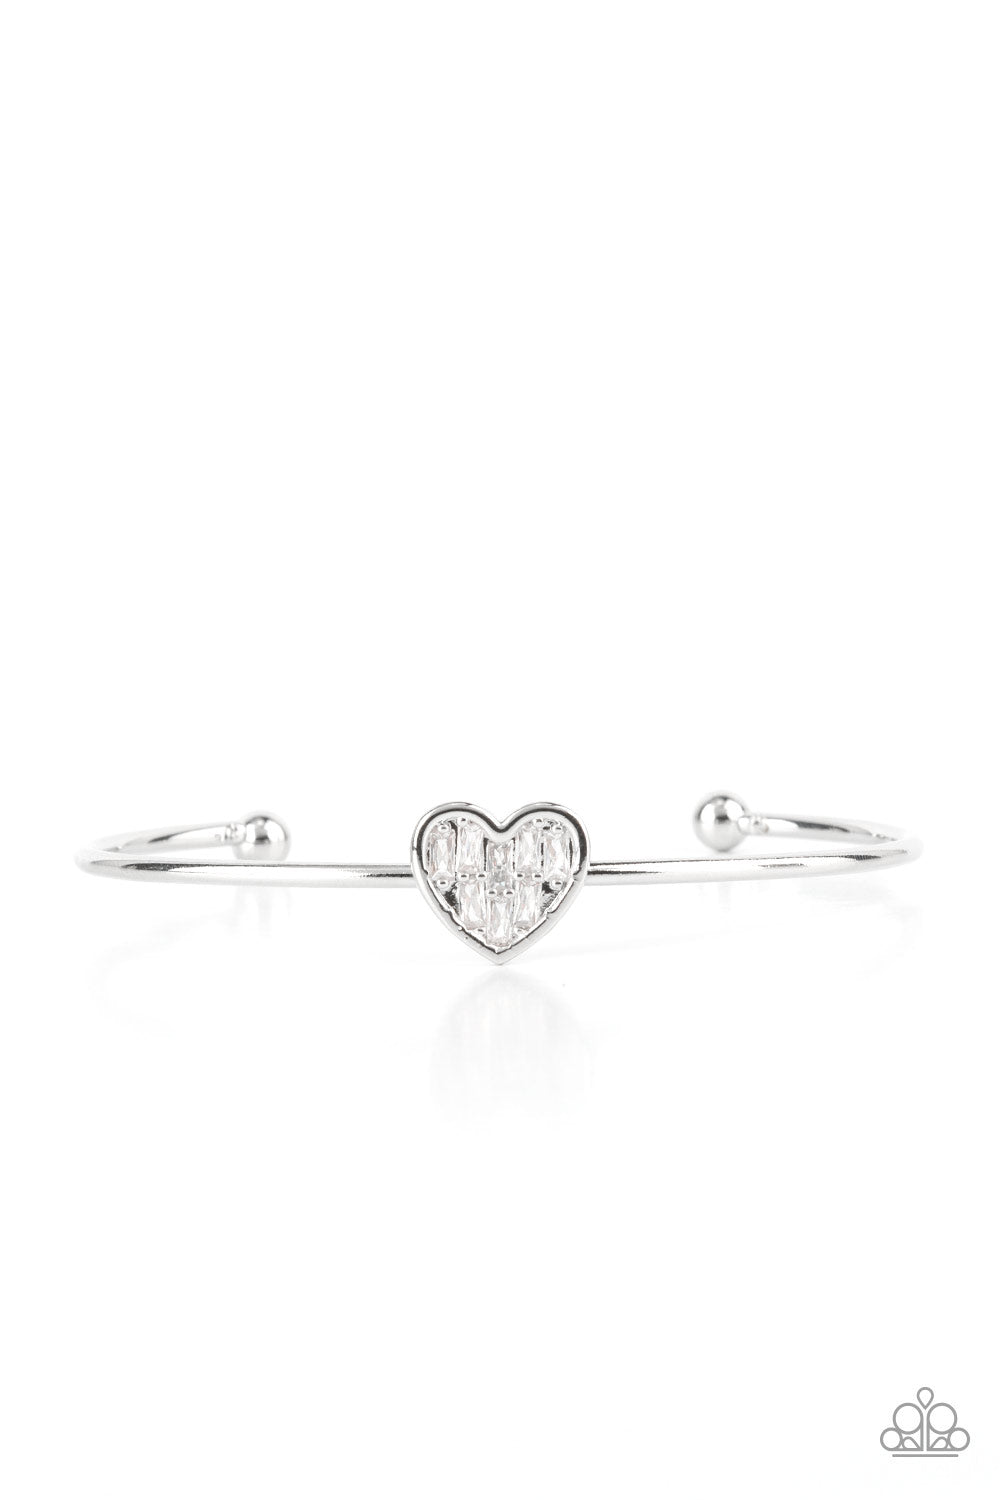 Paparazzi Accessories Heart of Ice - White